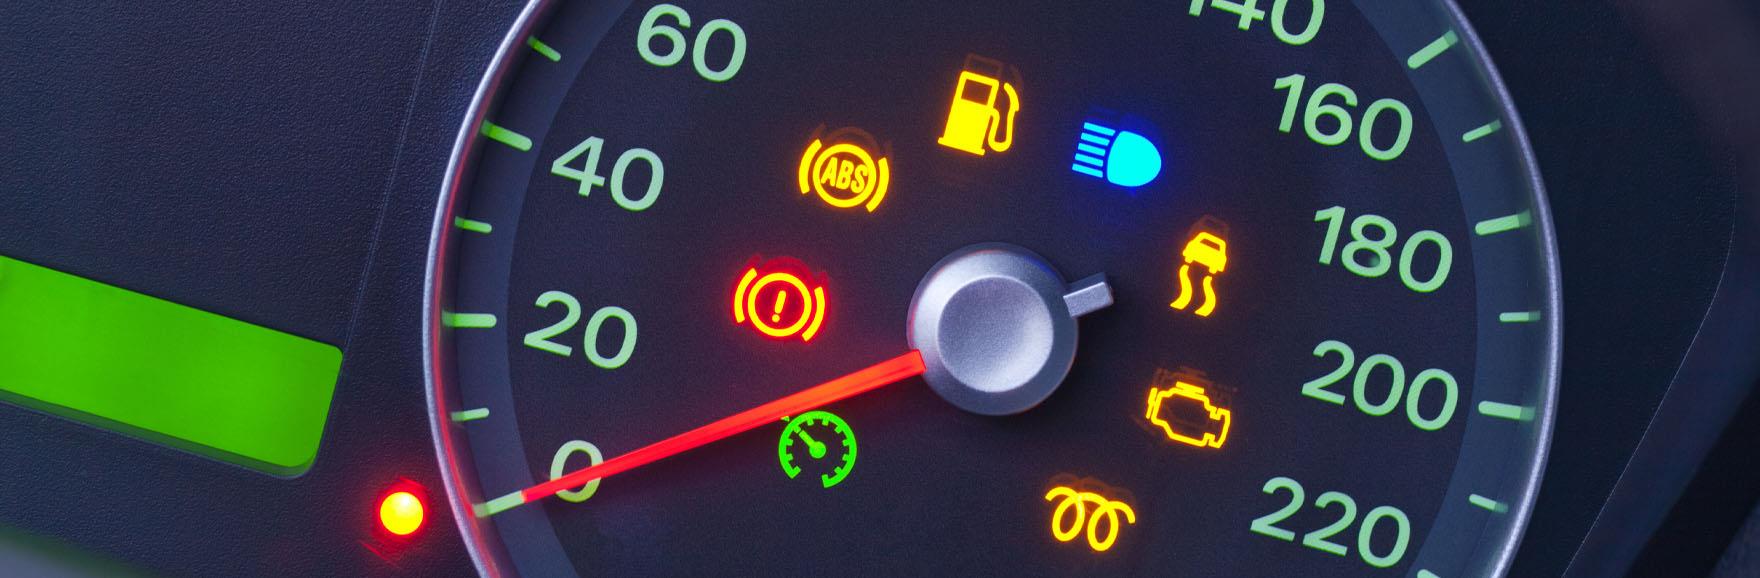 Three Dashboard Warning Lights That Require Immediate Attention: When to Stop Your Vehicle